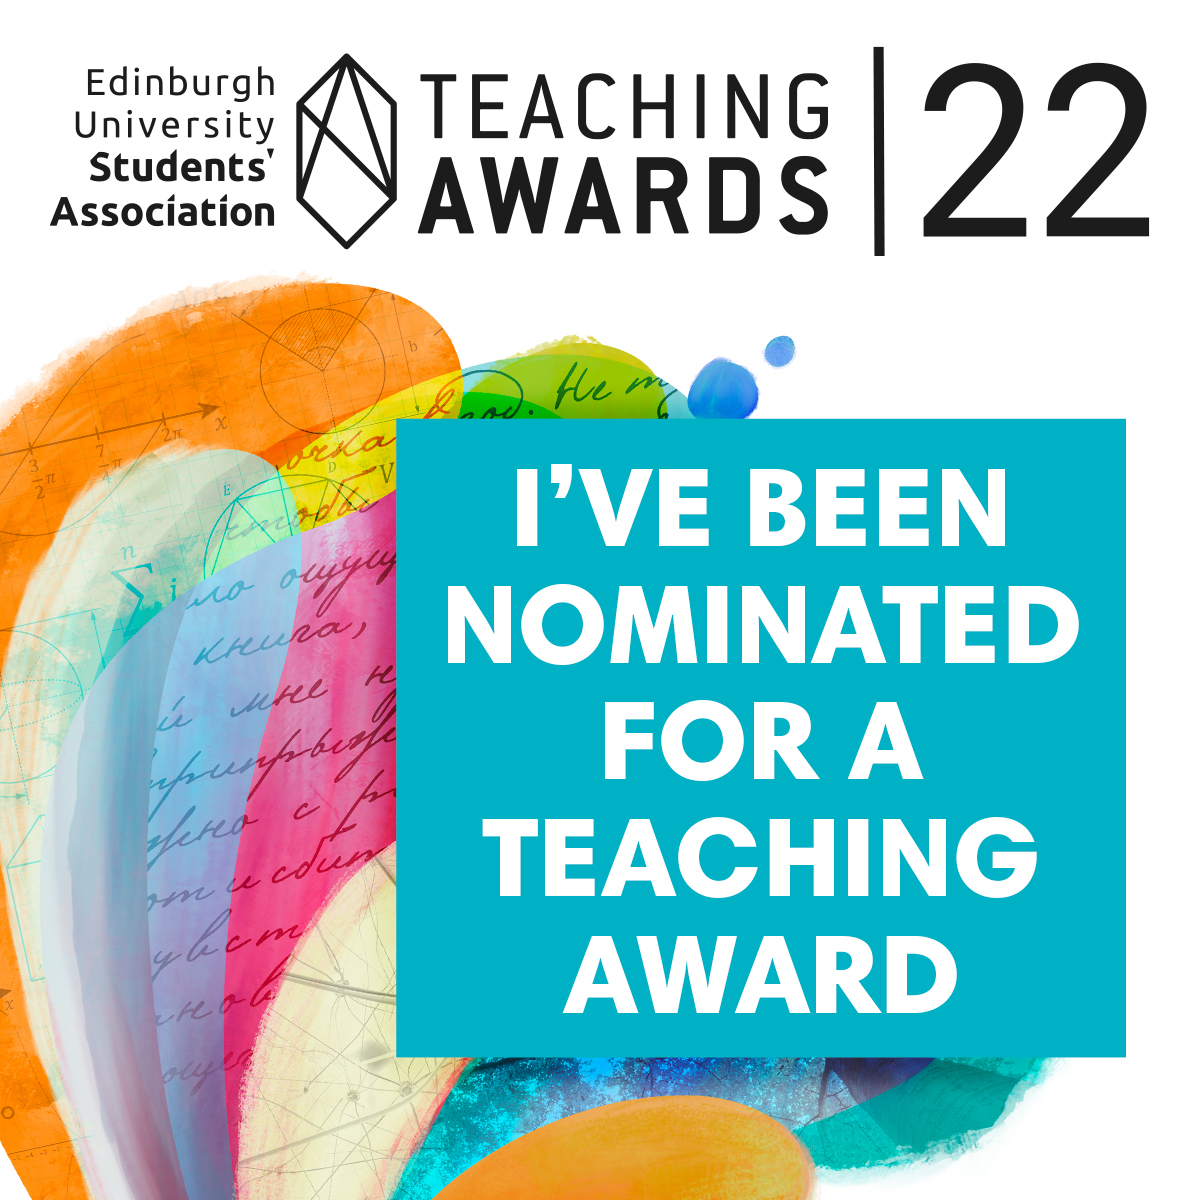 Being nominated in the categories **Teacher of the Year** and **Outstanding course** Lab-On-Chip Technologies 5 really made my day. Thanks to the Students who nominated me/us. @fmenolascina @SchoolOfEng_UoE  @EdUniStudents  #CelebratingTogether